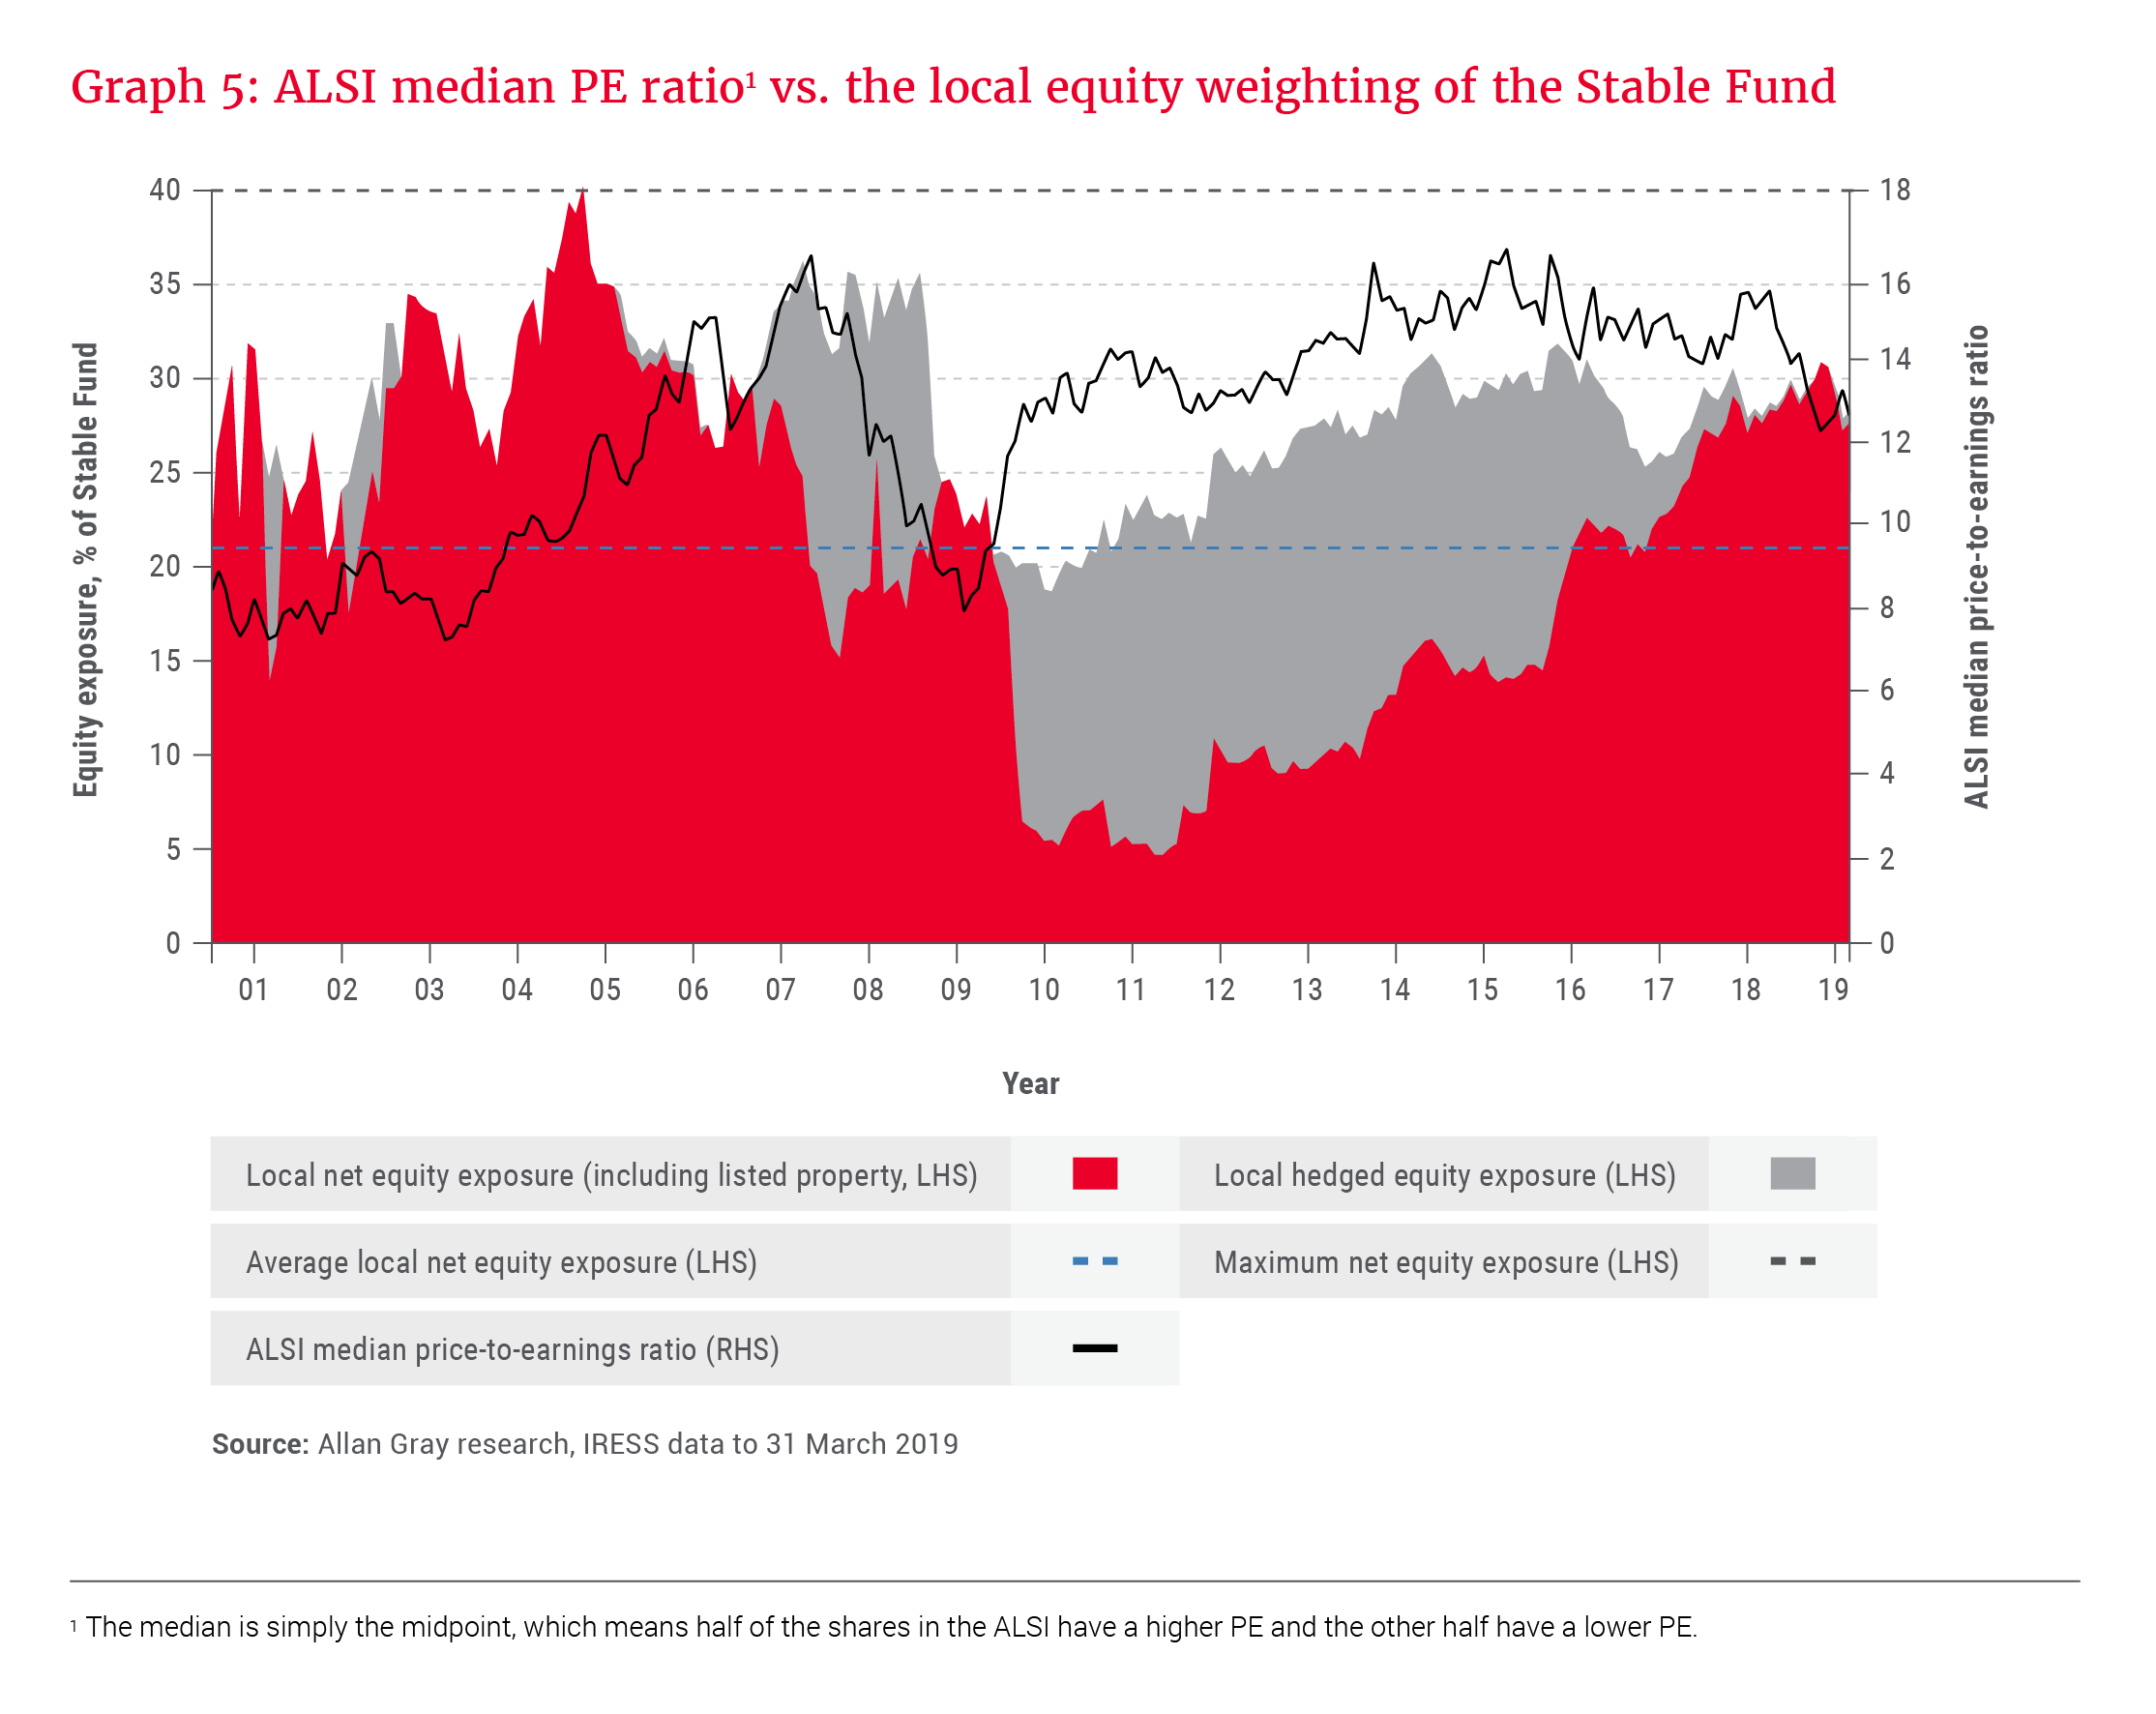 ALSI median PE ratio vs. the local equity weighting of the Allan Gray Stable Fund 